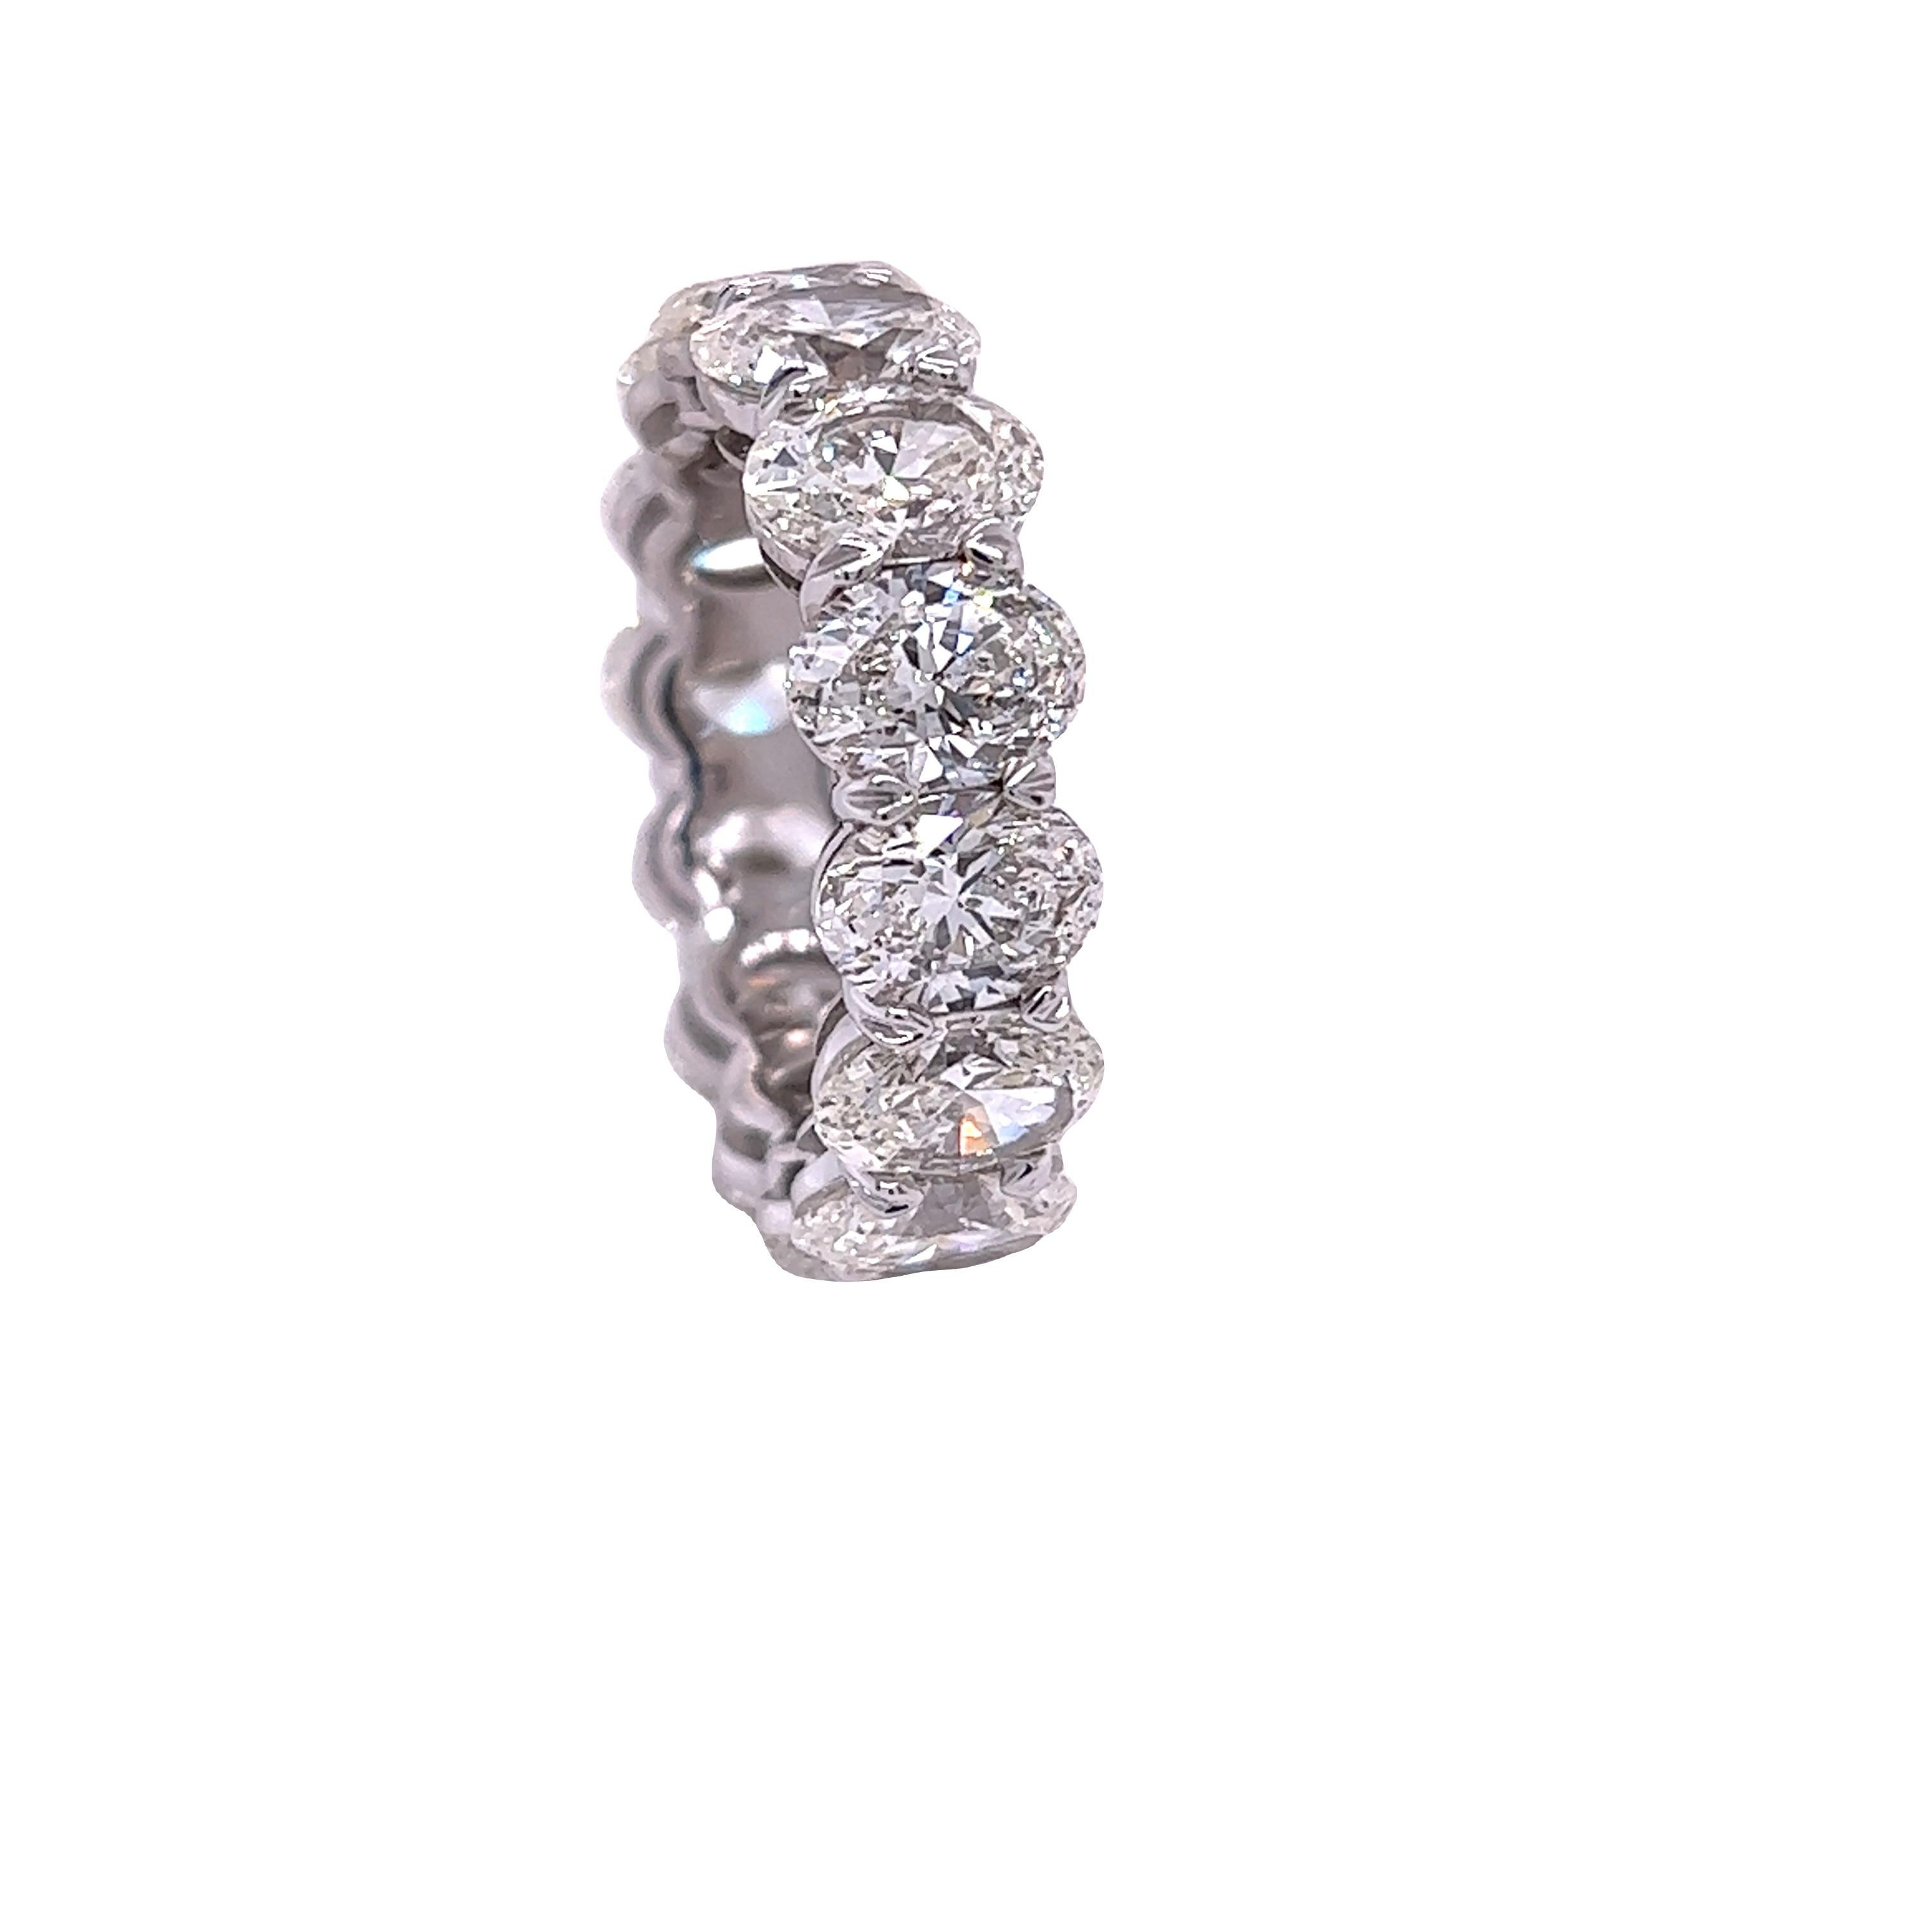 Rosenberg Diamonds & Co. 10.11 total carat weight Oval shape diamond eternity band. This beautiful platinum eternity band has fourteen oval shape diamonds ranging from G-H in color VVS1-SI2 in clarity with just under one carat each, all accompanied